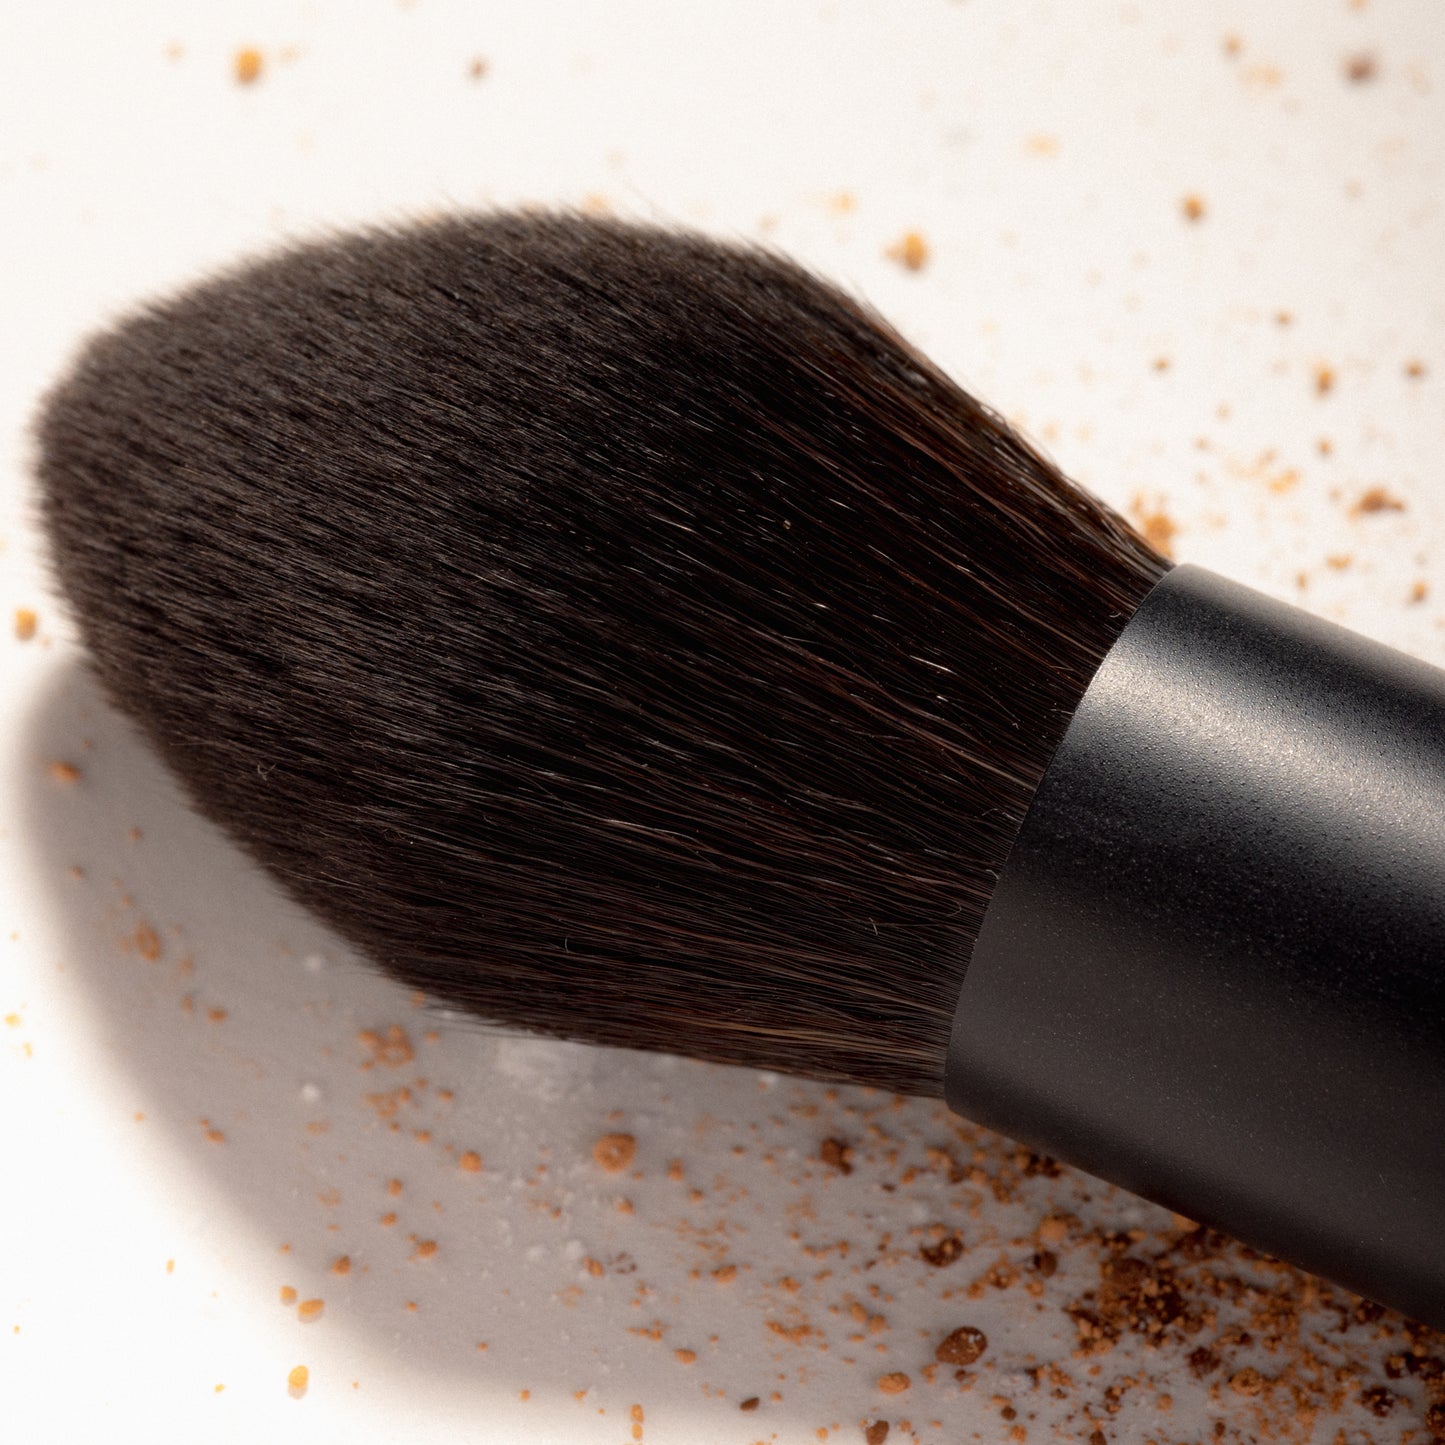 Untitled No 1 Jo Leversuch full powder makeup brush with synthetic hair  Edit alt text